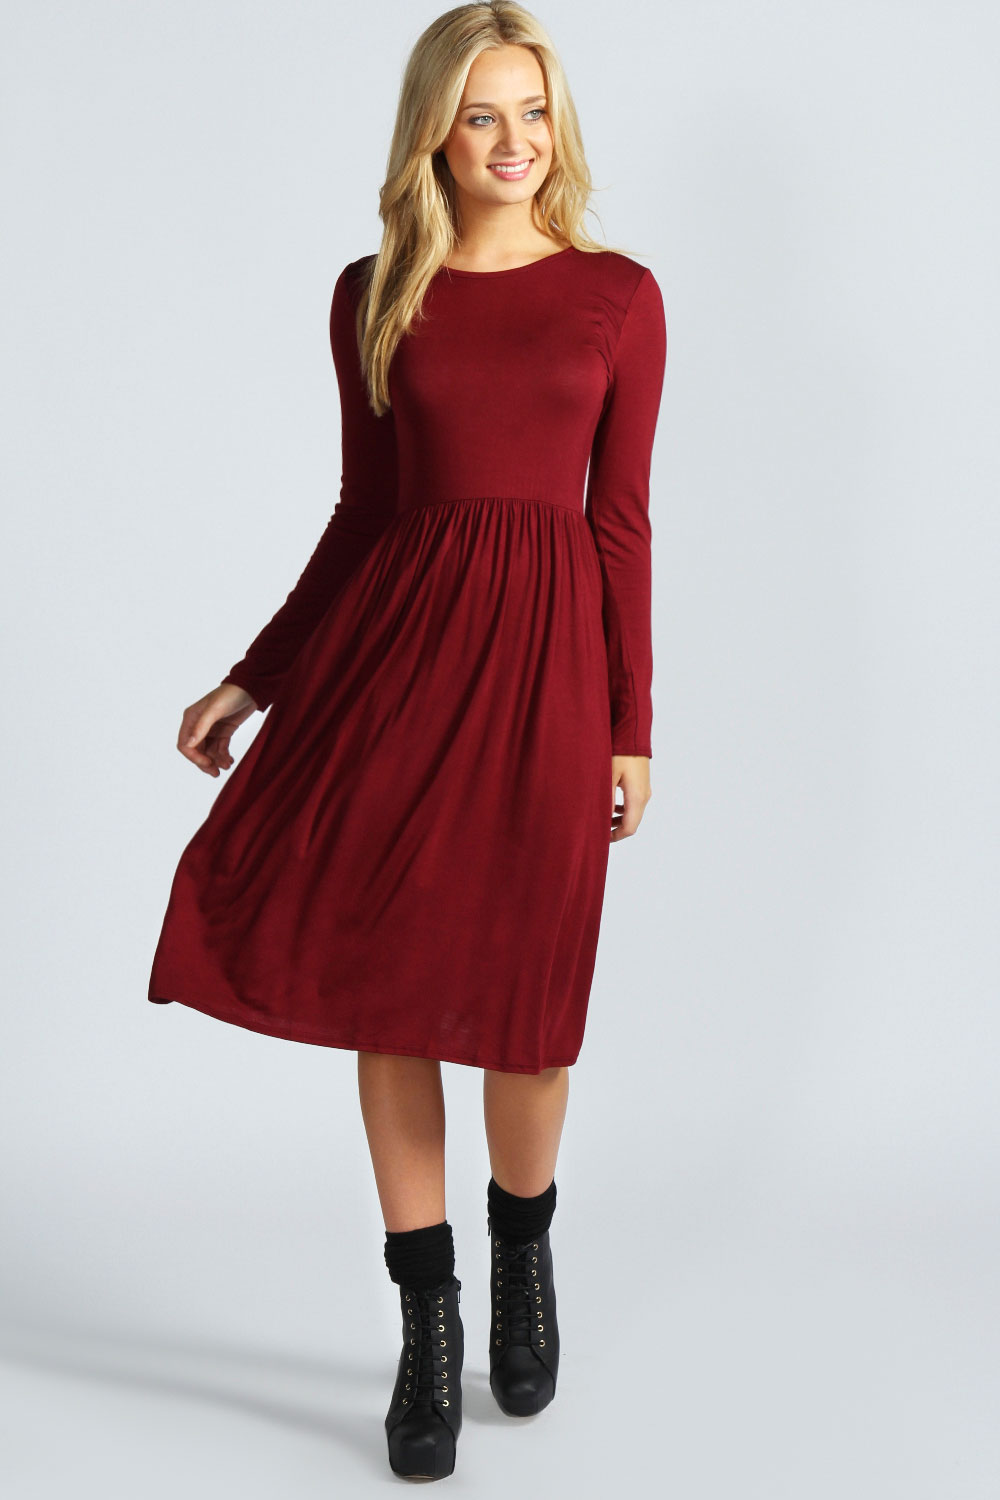 Long Sleeve Midi Dress Picture Collection  Dressed Up Girl